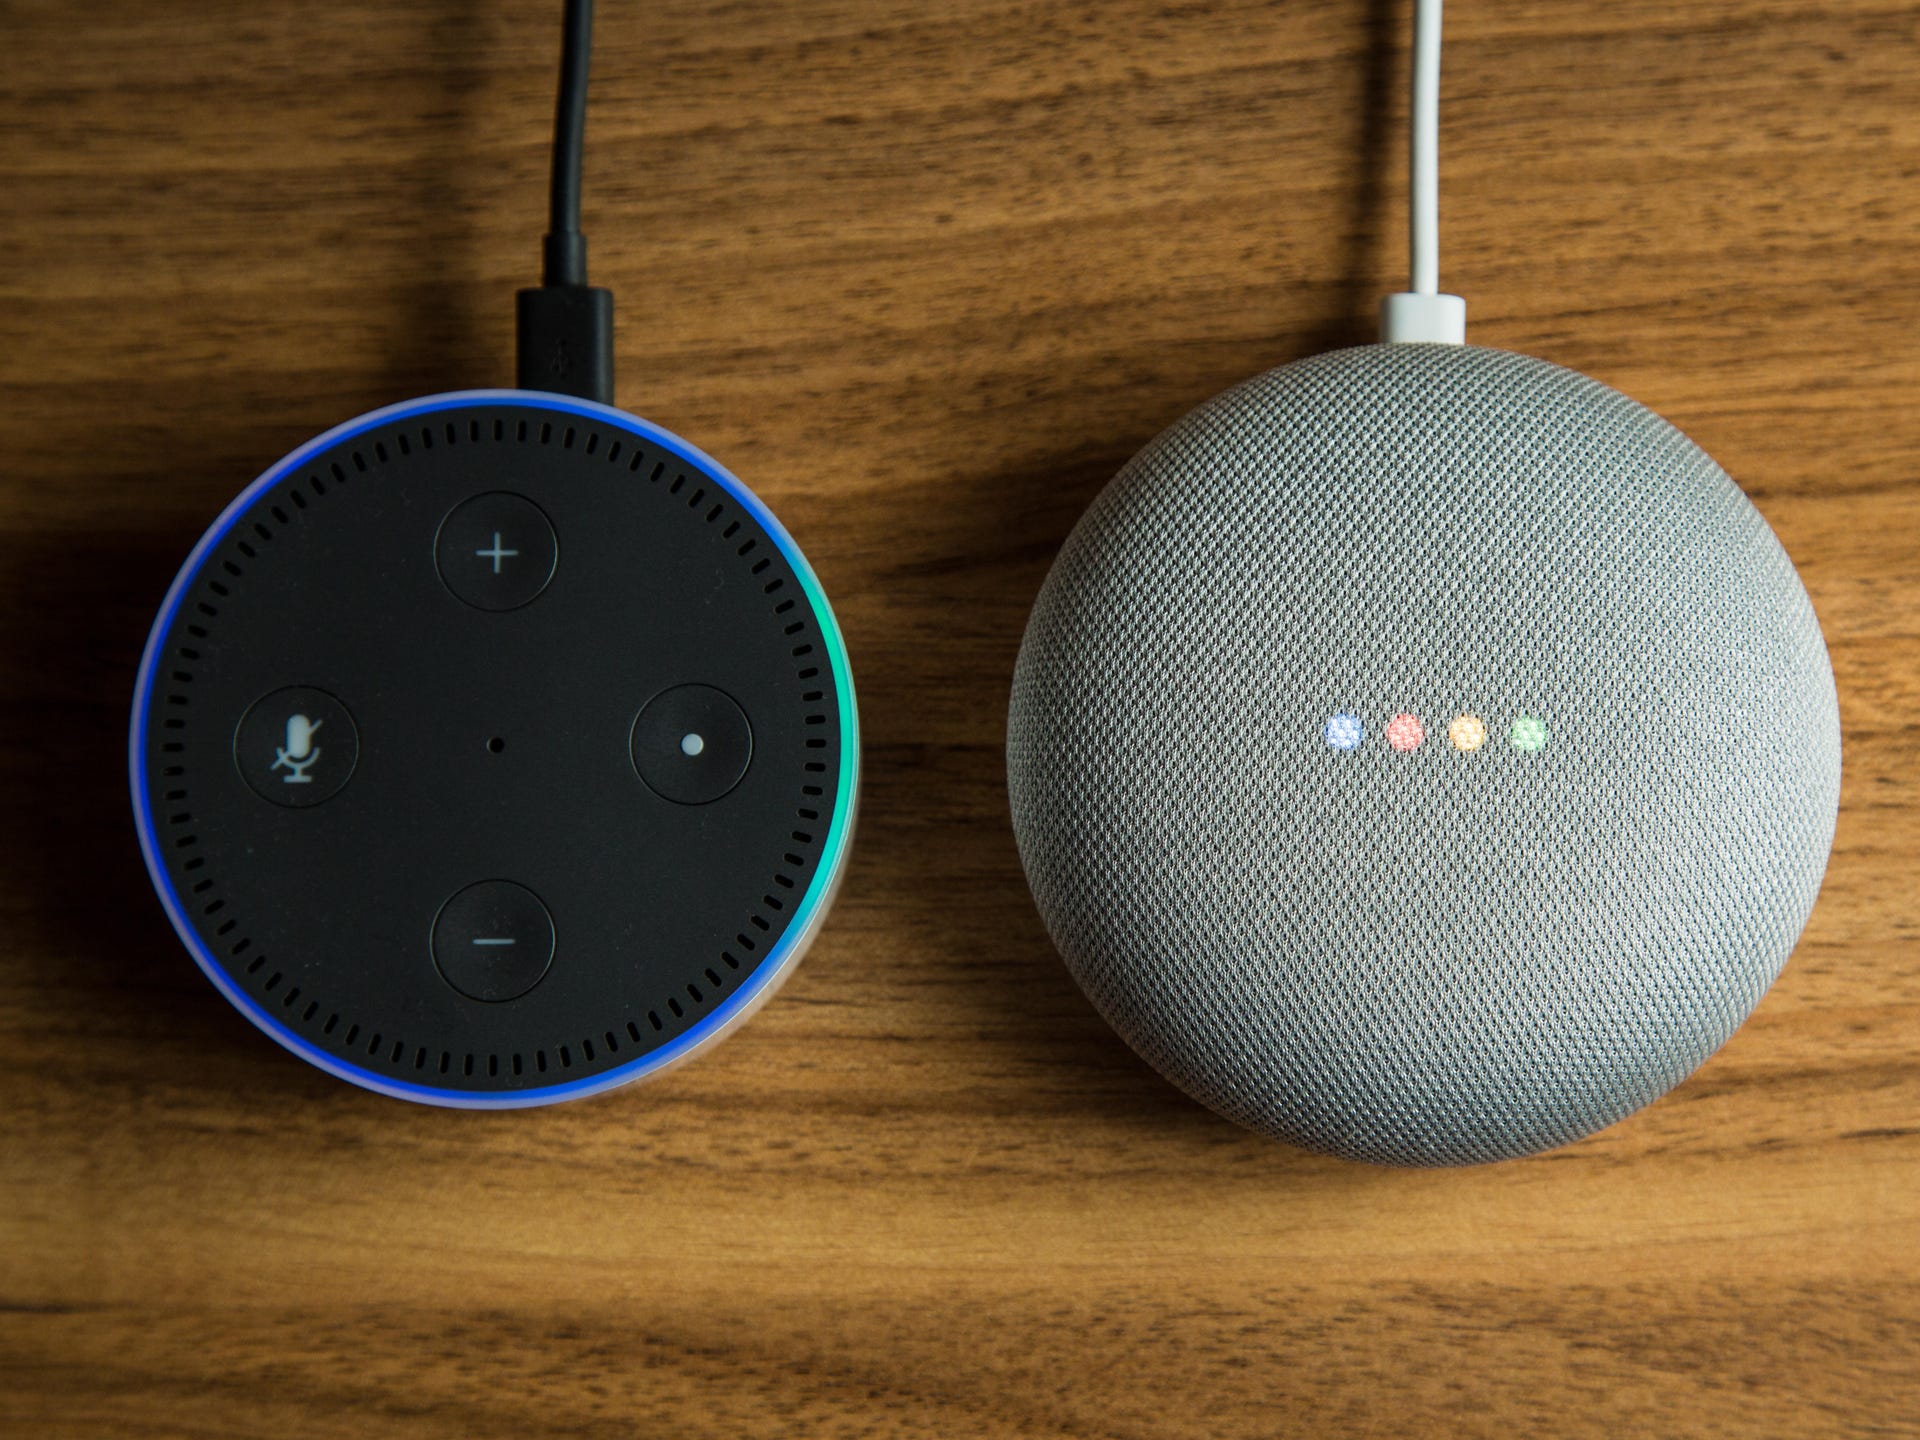 mixer gyde tilskuer Google Home Mini is a great alternative to the Amazon Echo Dot - CNET